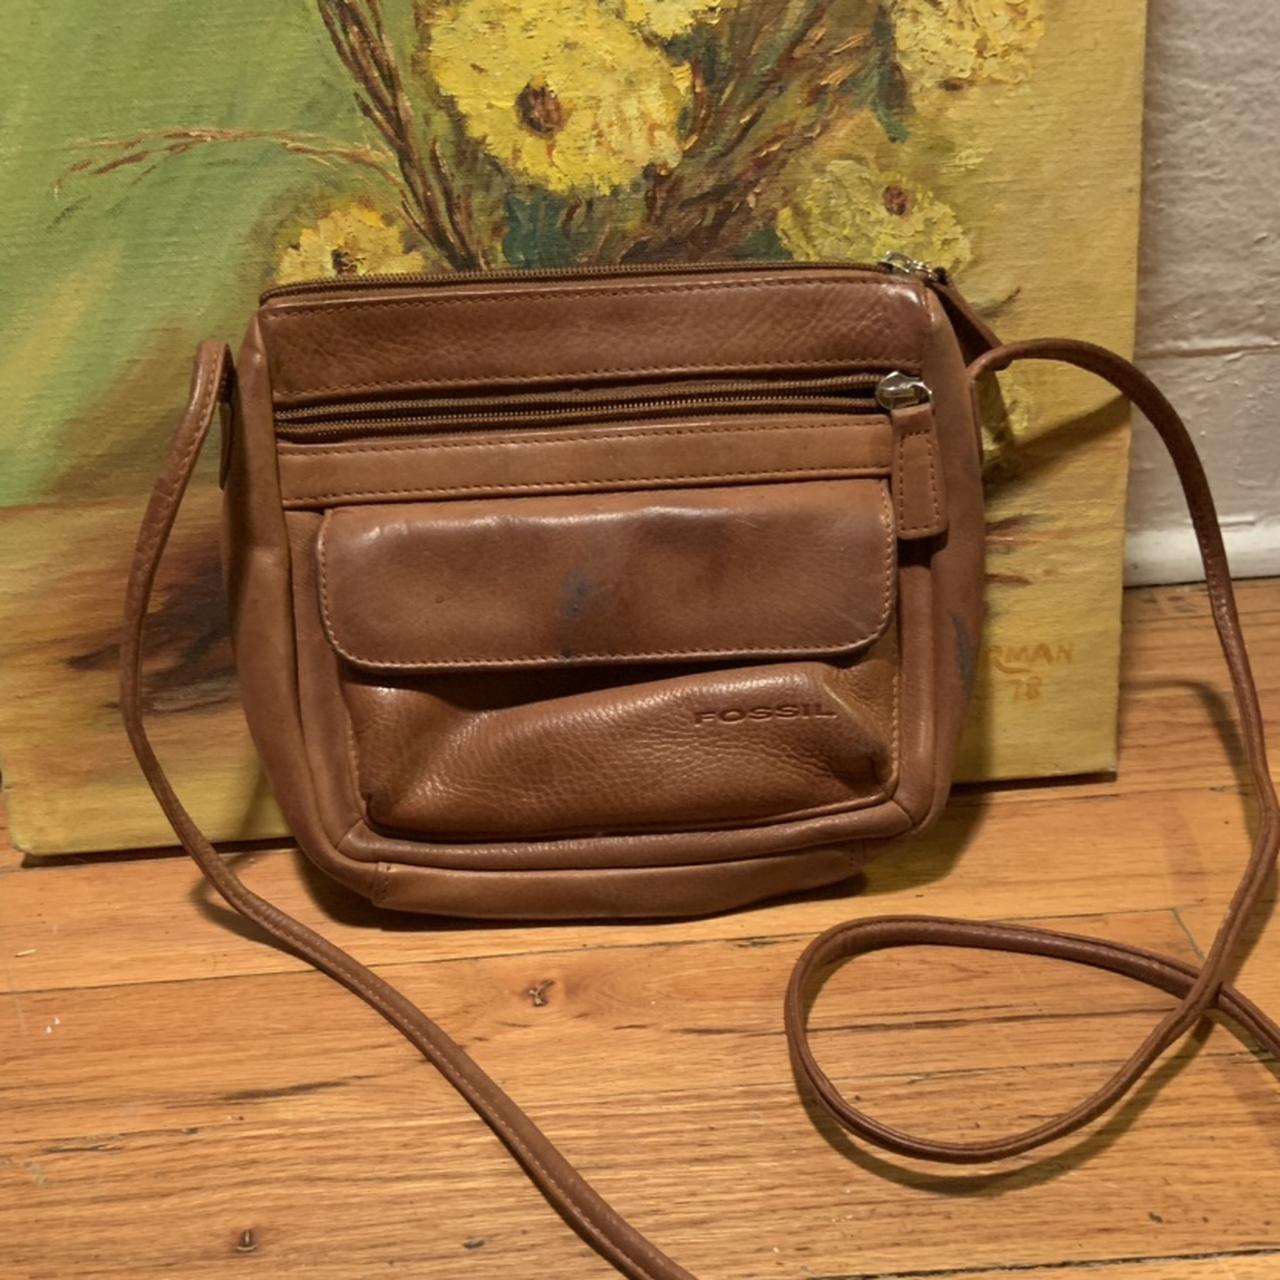 Fossil | Bags | Vintage Fossil Leather Purse With Key | Poshmark